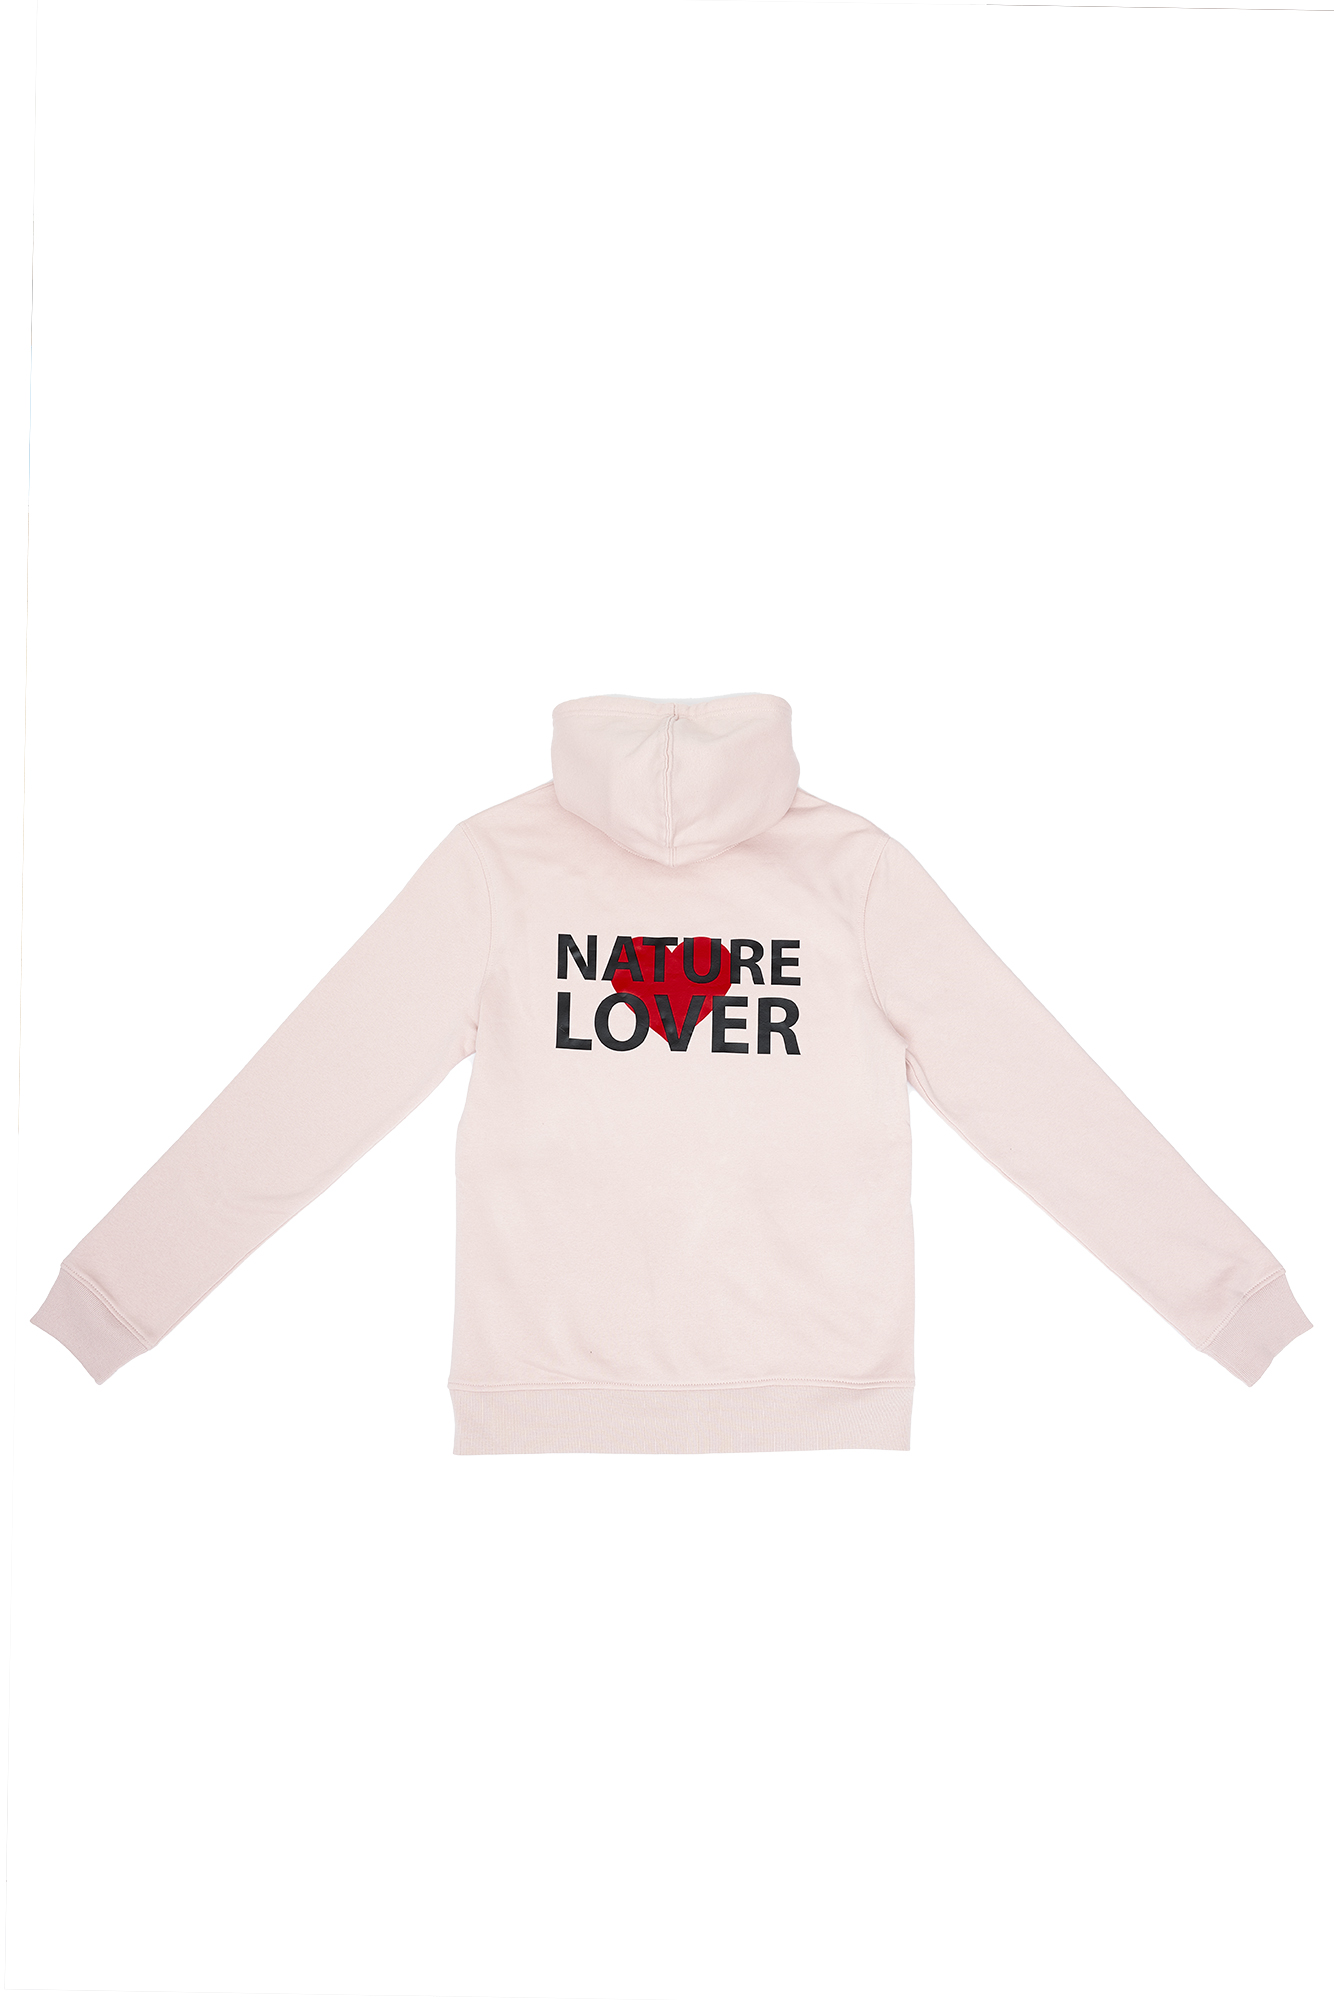 Pull à capuche - « The seed of your Positivity » (Couleur Baby Pink)